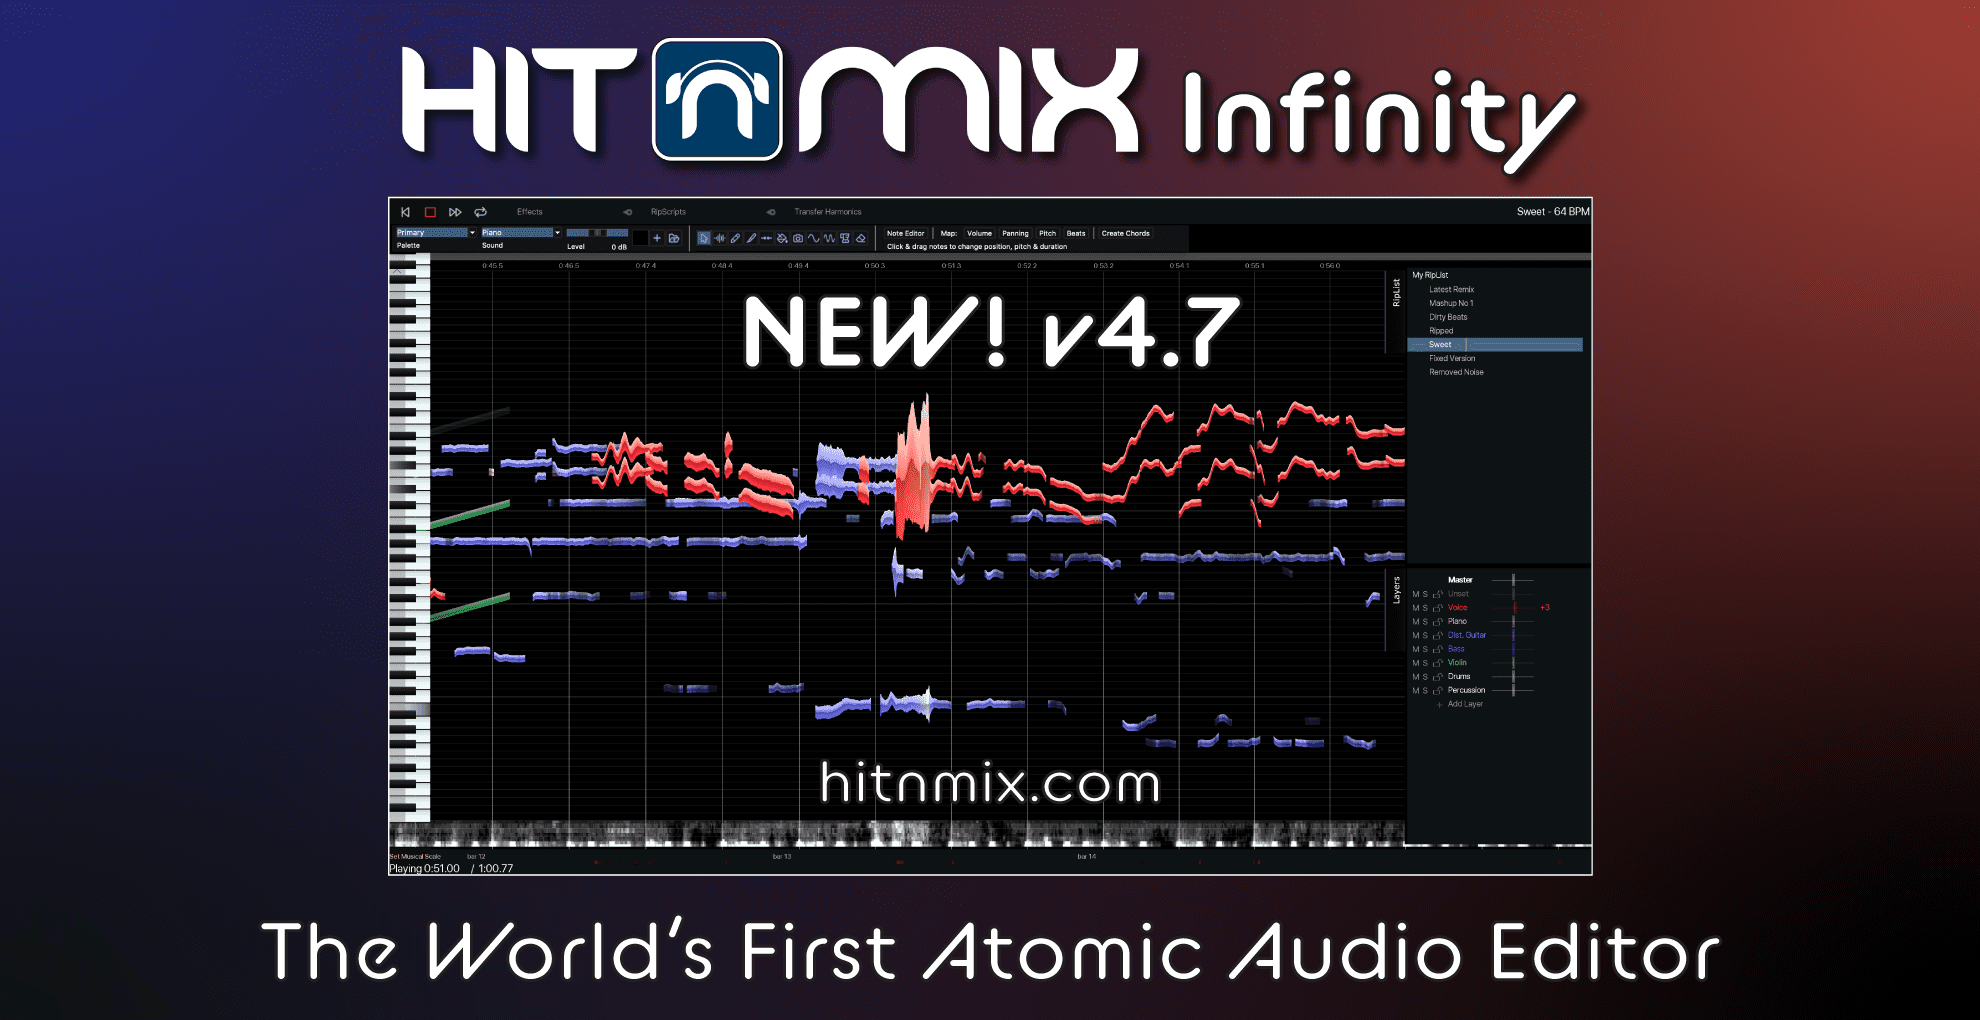 Hit’n’Mix Infinity 4.7 – Now With A Revamped UI And Enhanced Editing Capabilities